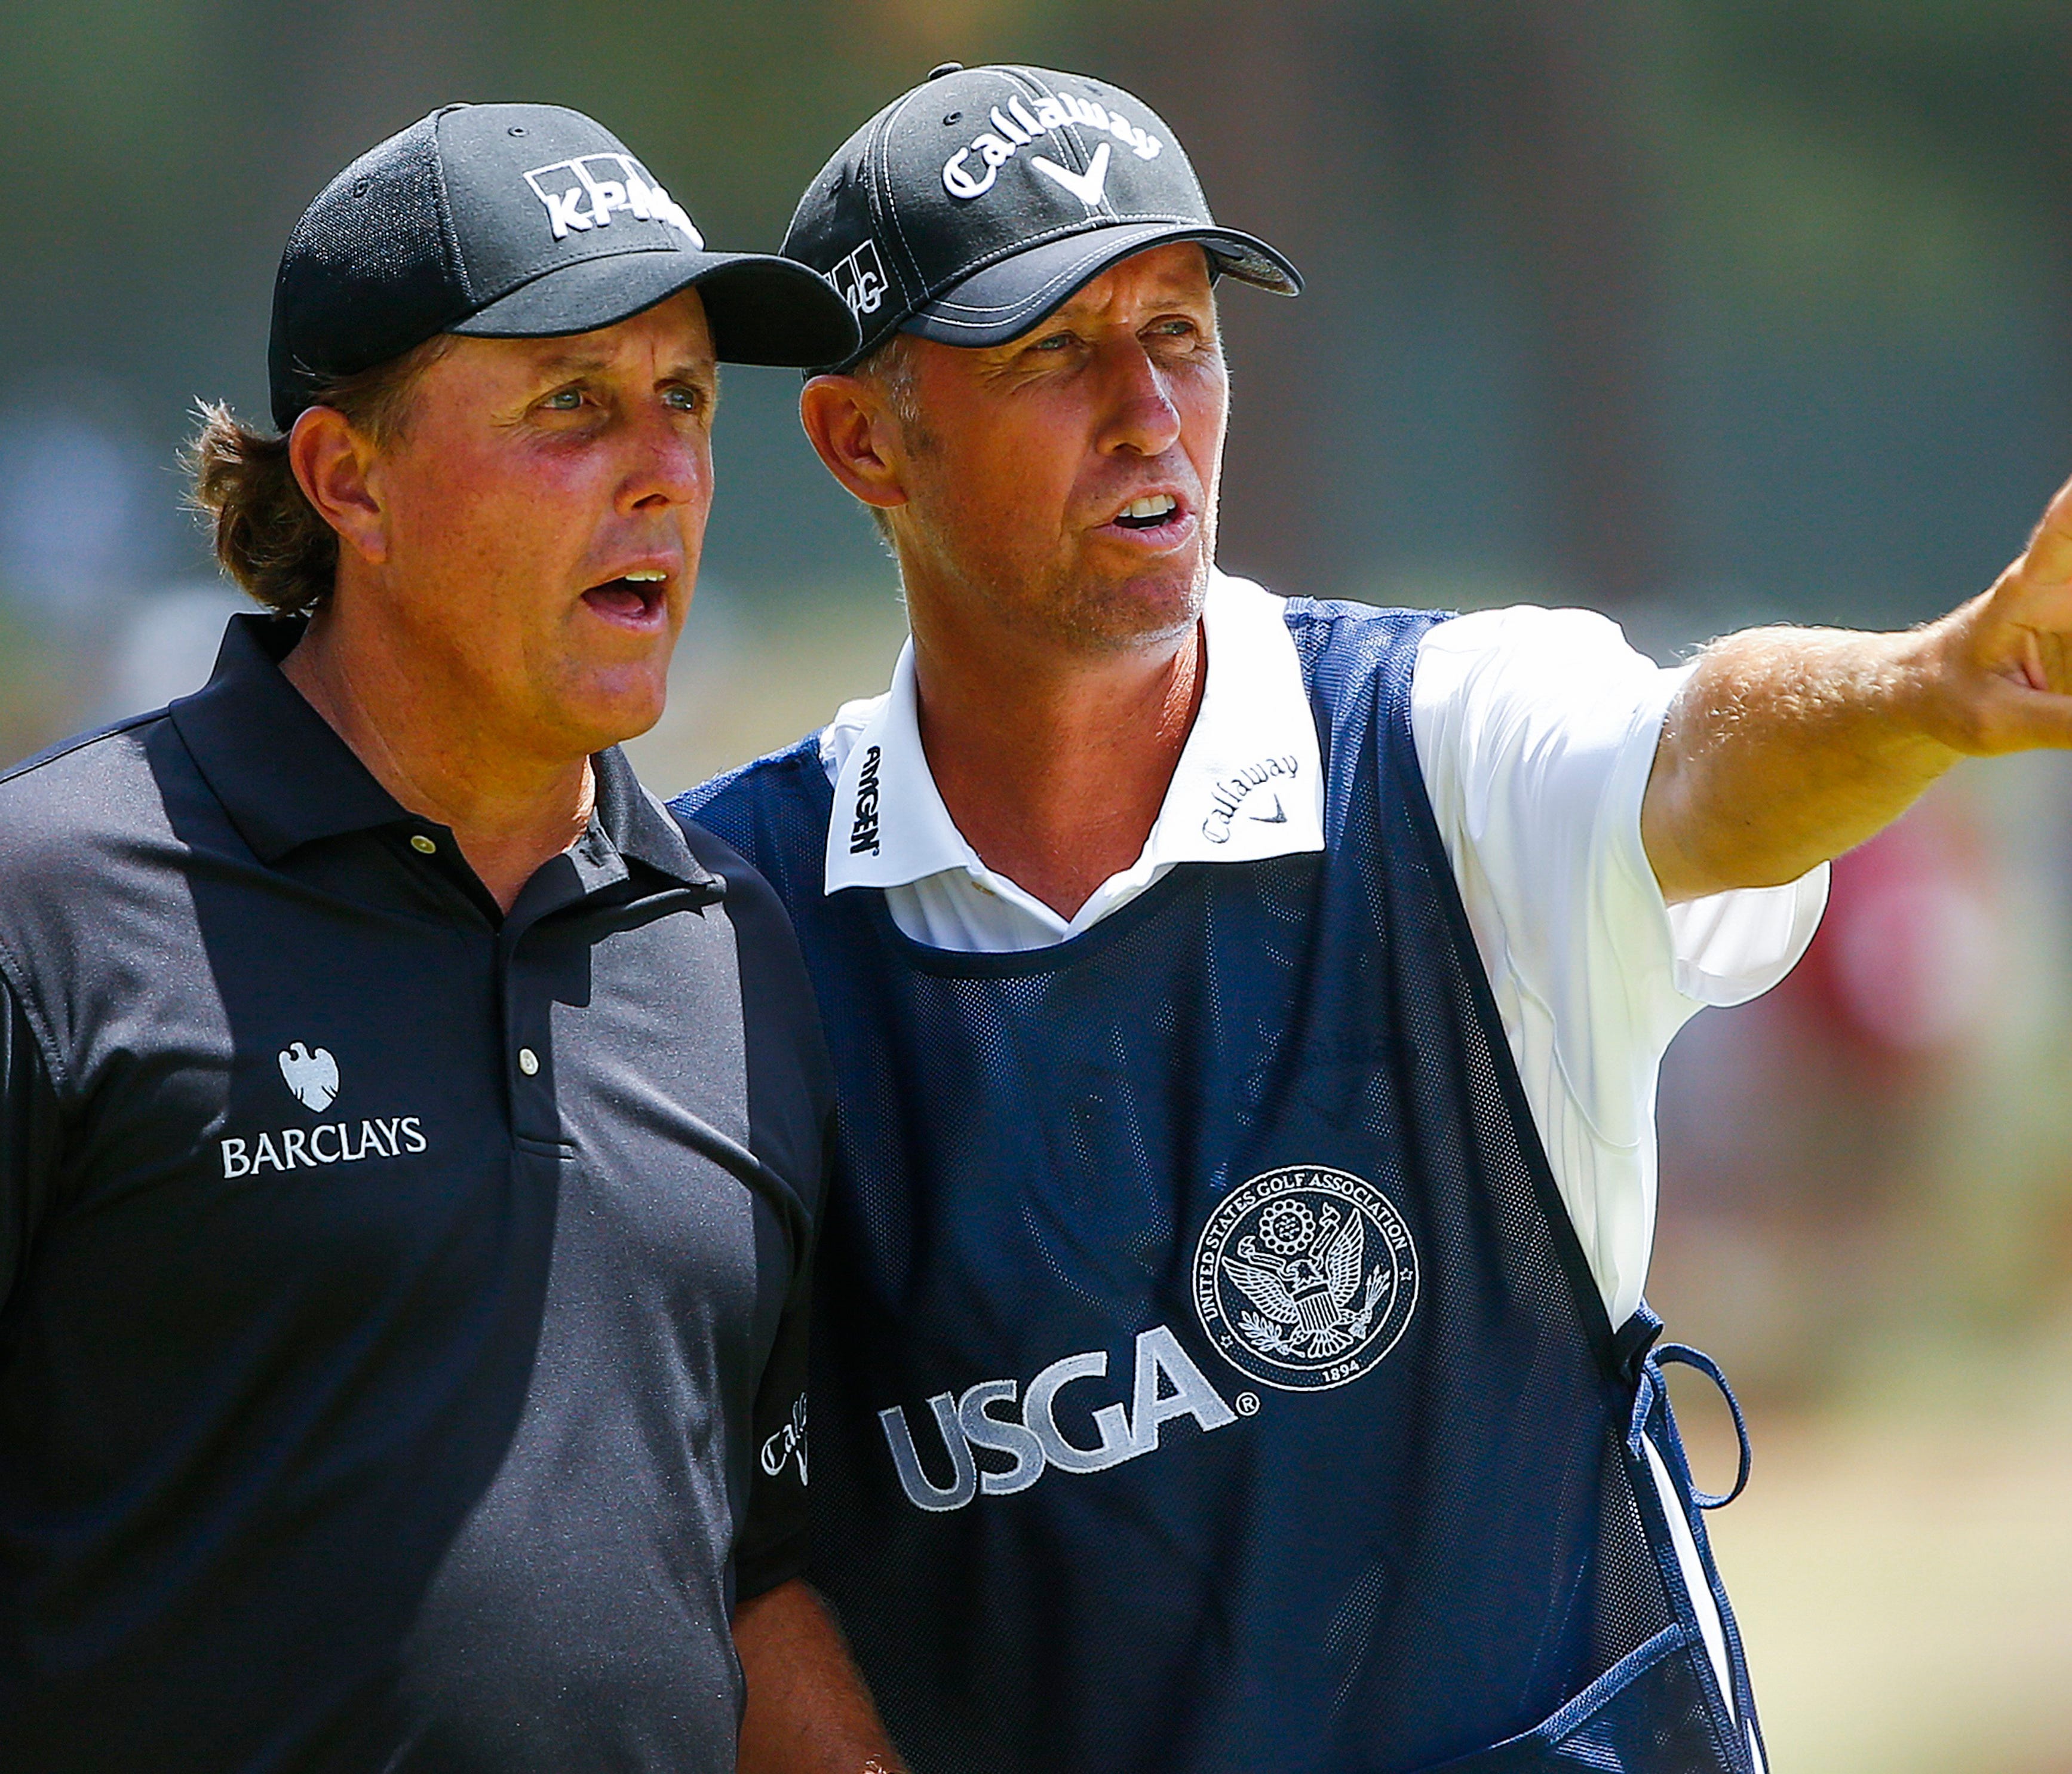 epa06042099 (FILE) - Phil Mickelson of the US (L) and his caddie Jim Mackay (R) talk on the seventh tee during the first round of the 2014 US Open Championship on the Pinehurst No. 2 course at the Pinehurst Resort and Country Club in Pinehurst, North